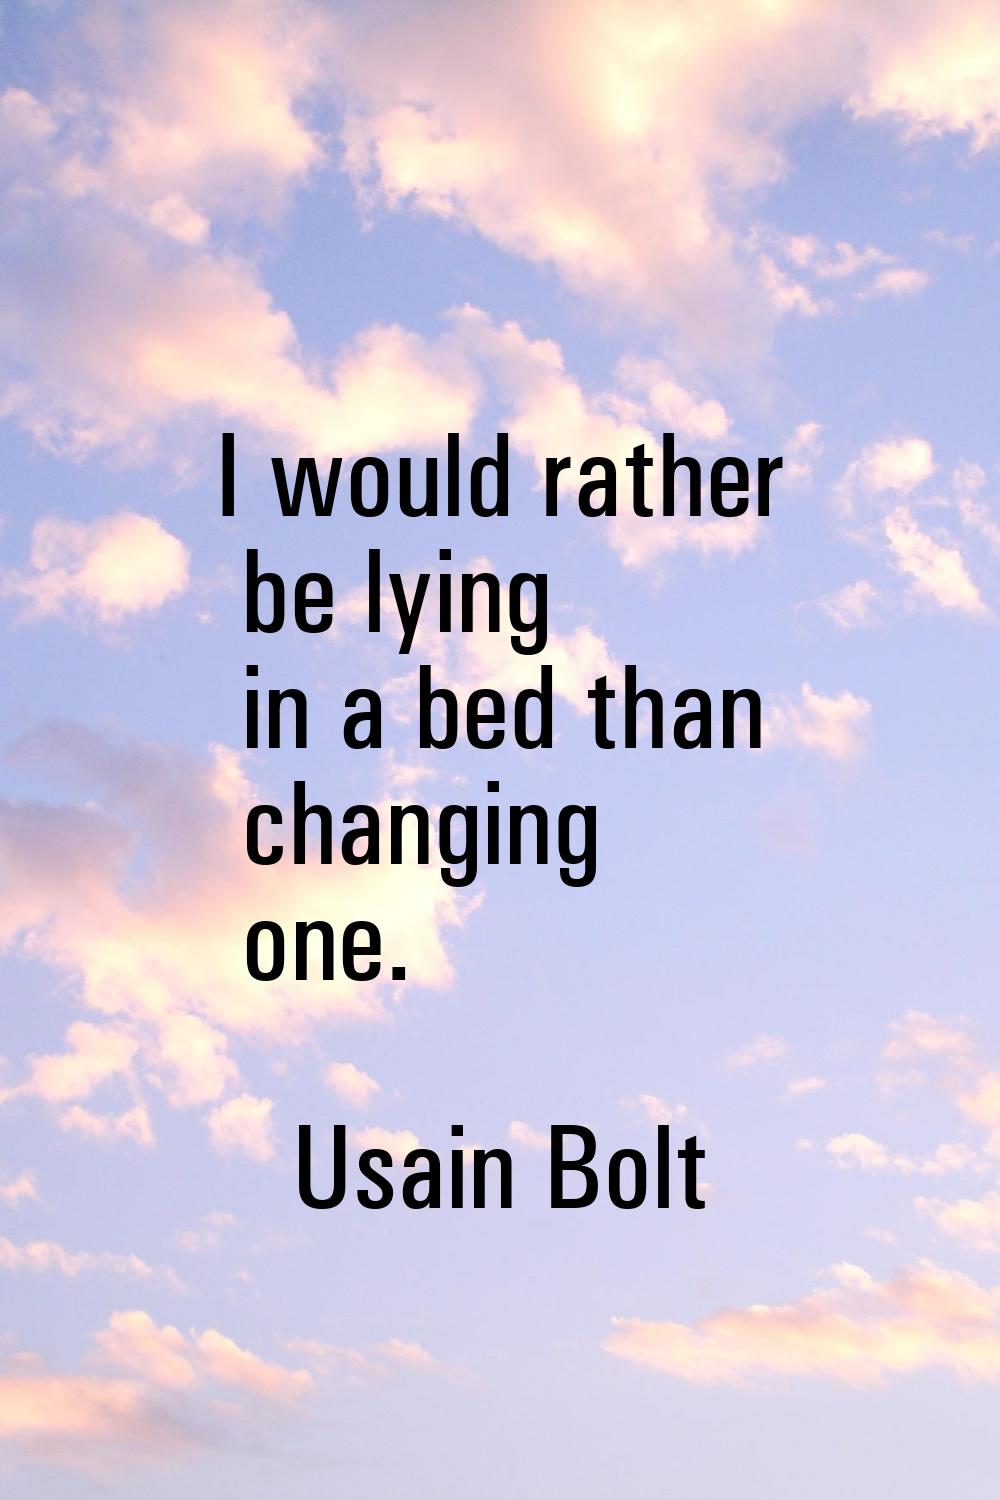 I would rather be lying in a bed than changing one.